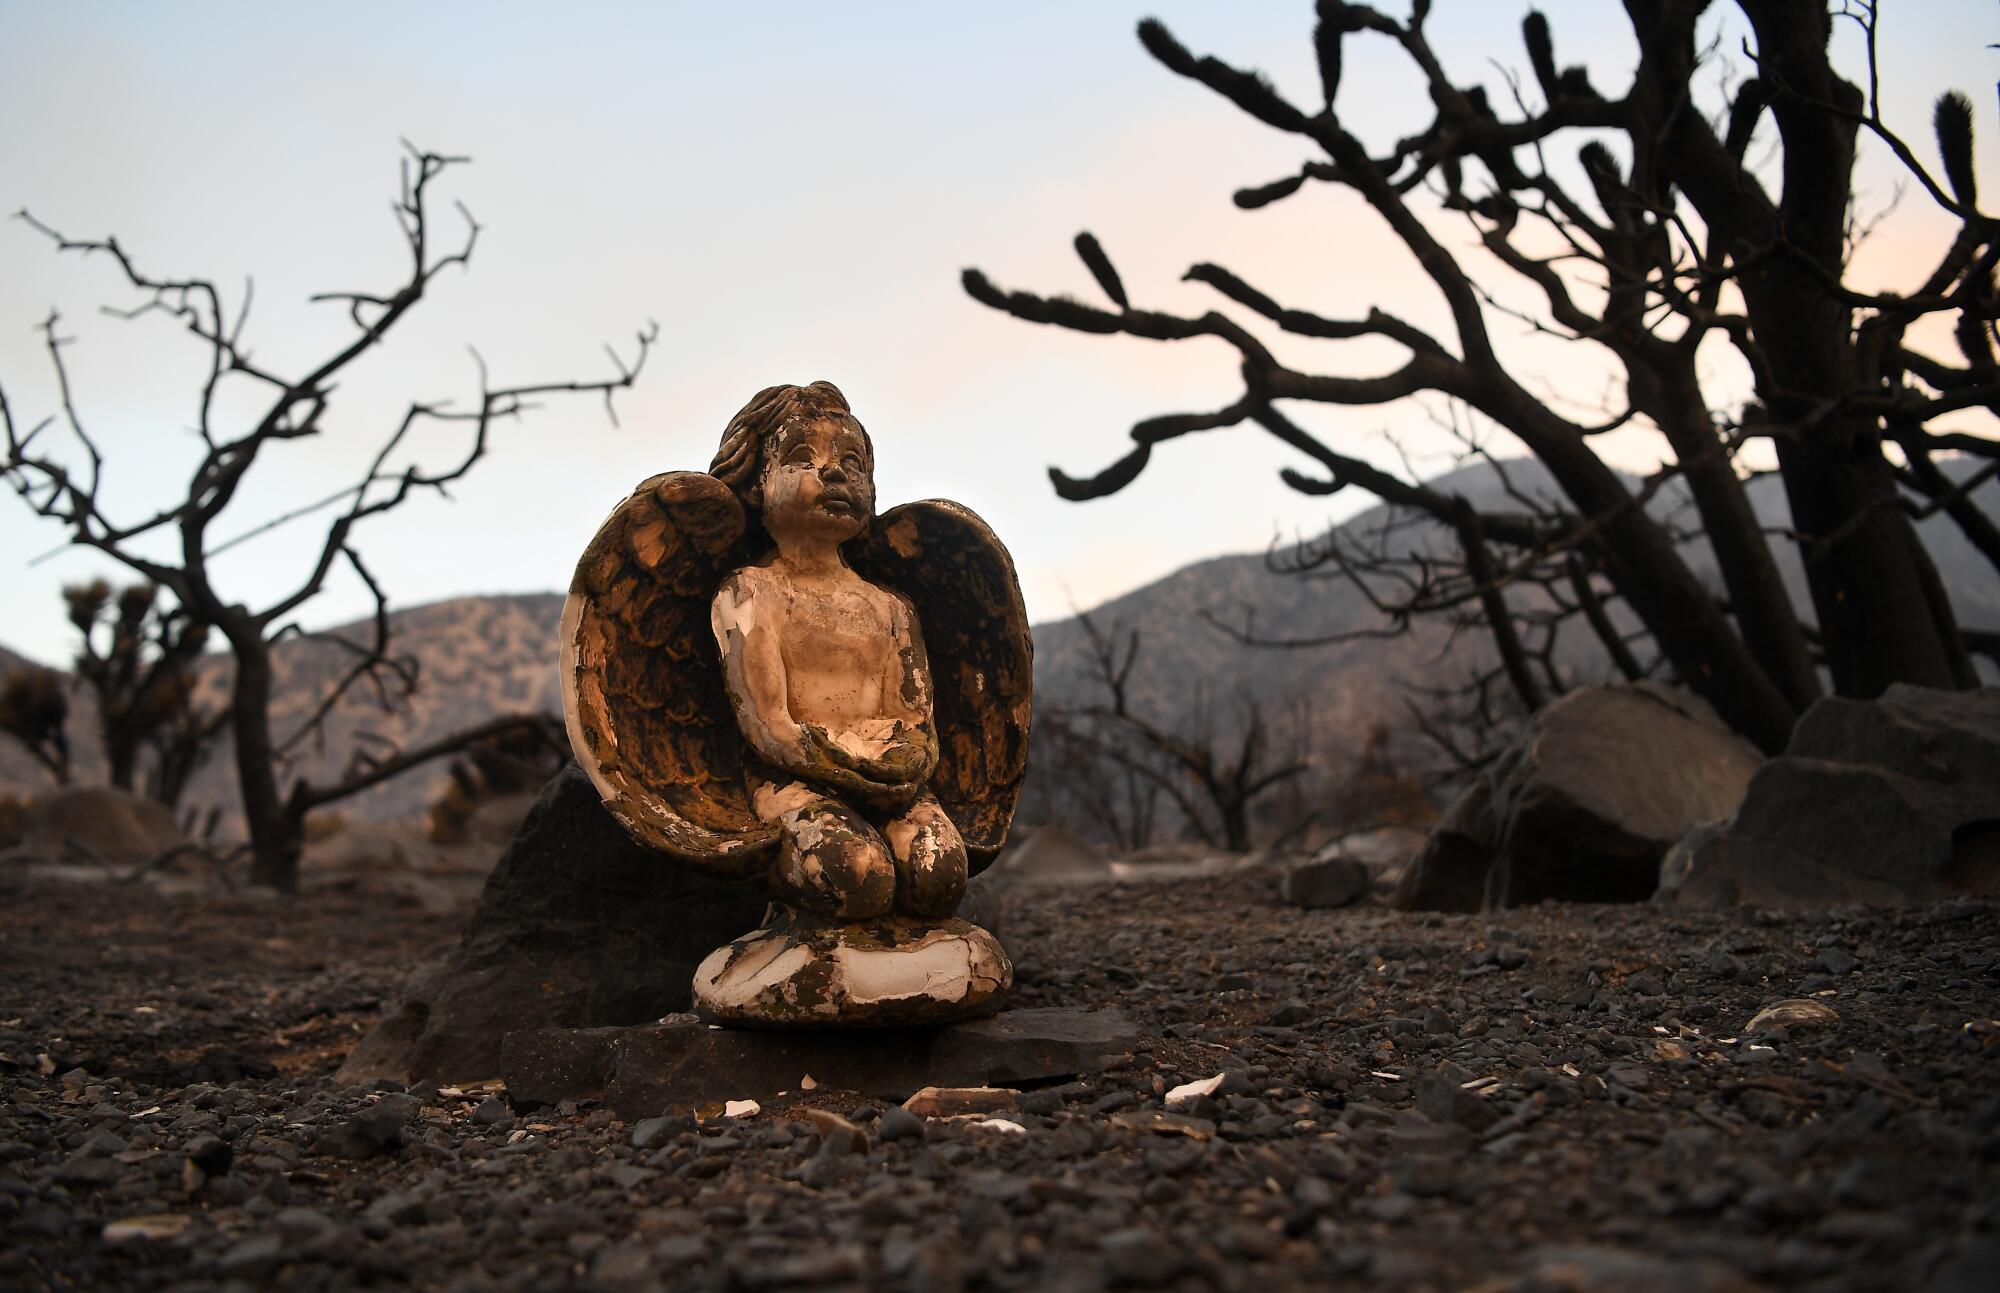 A burned statue of a baby angel in Juniper Hills on Saturday, Sept. 19.